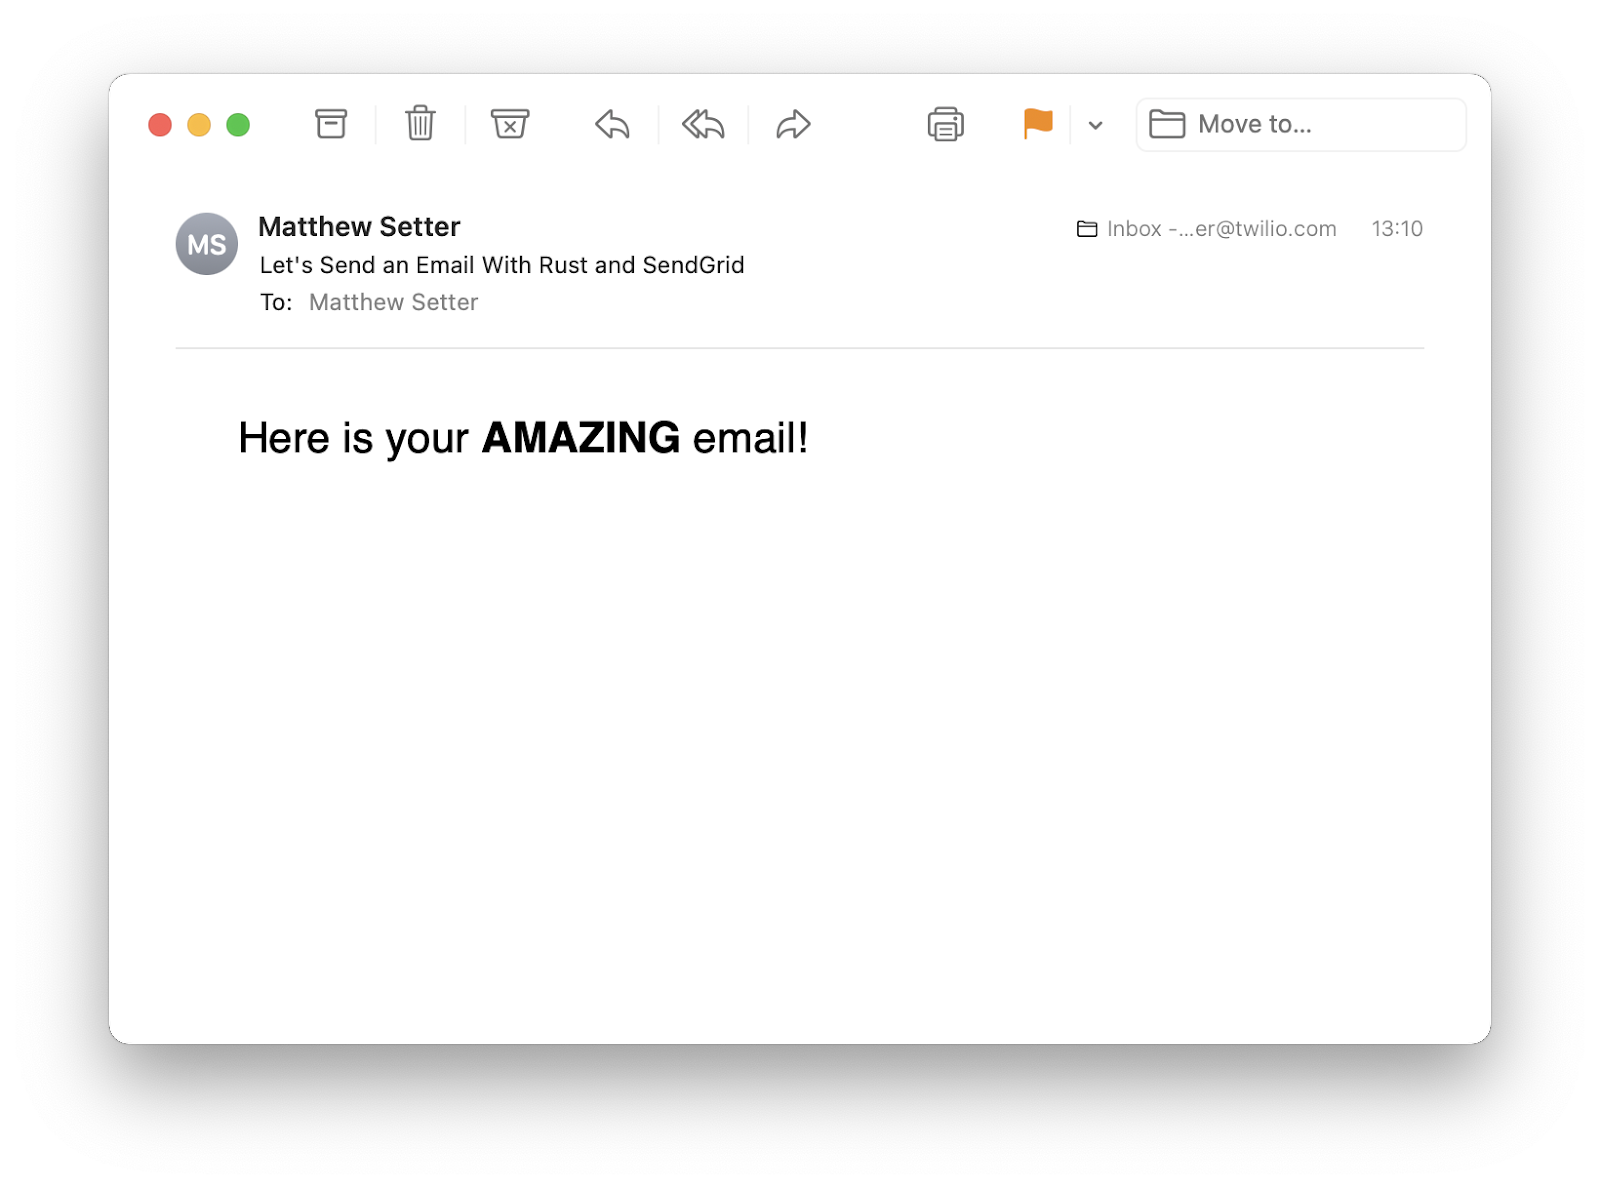 The received email in Apple Mail